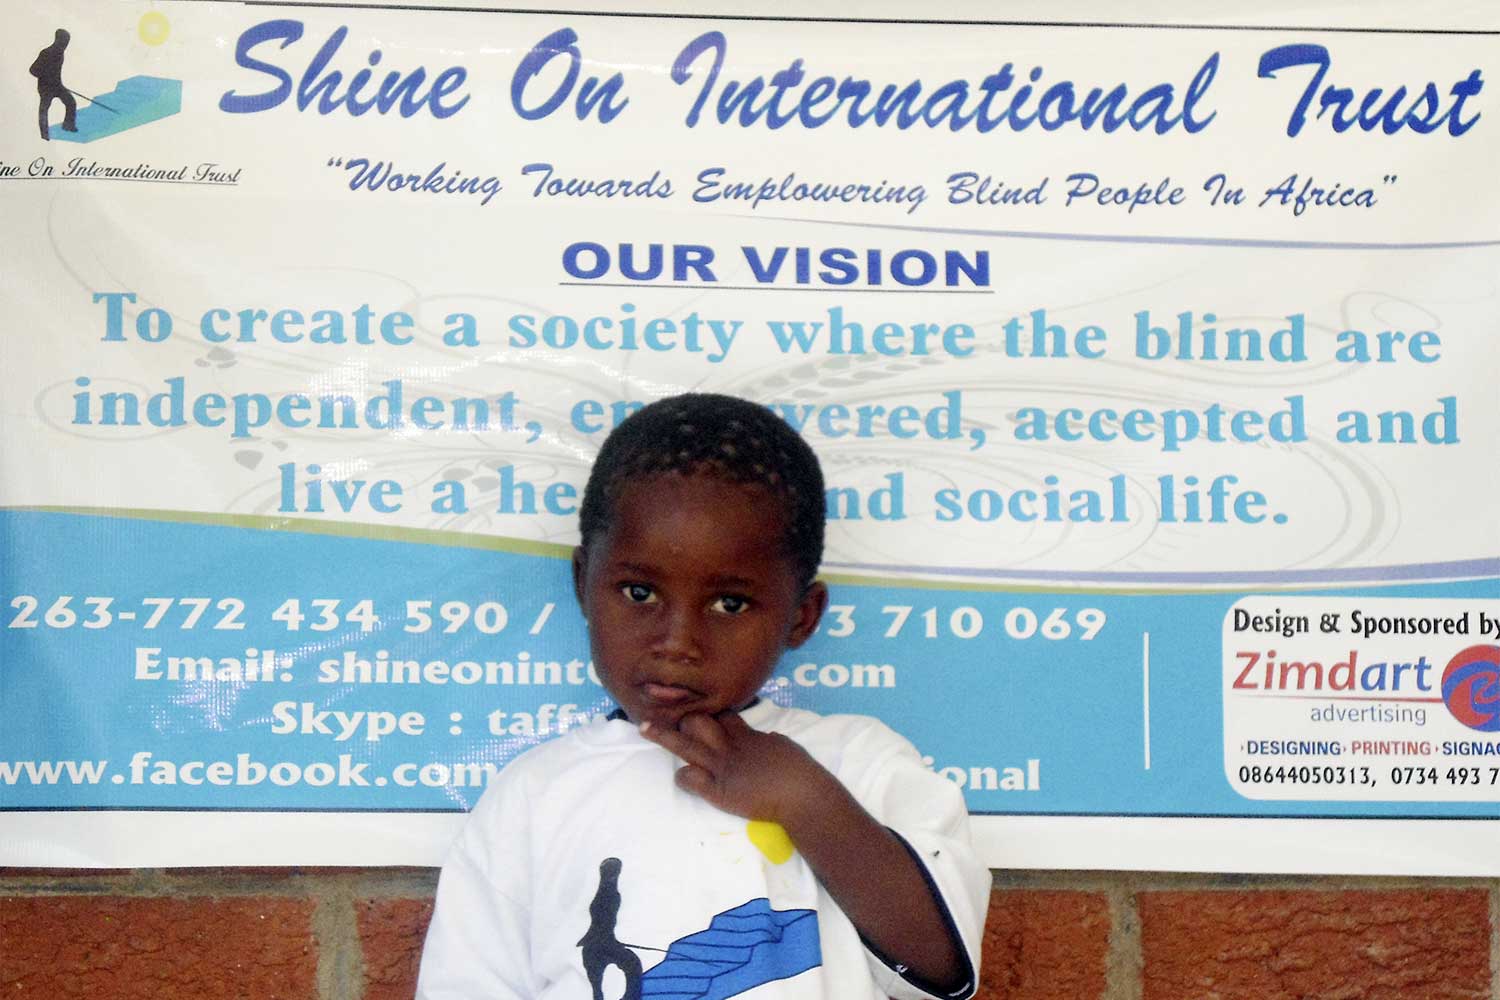 Boy in front of Shine on International Trust poster